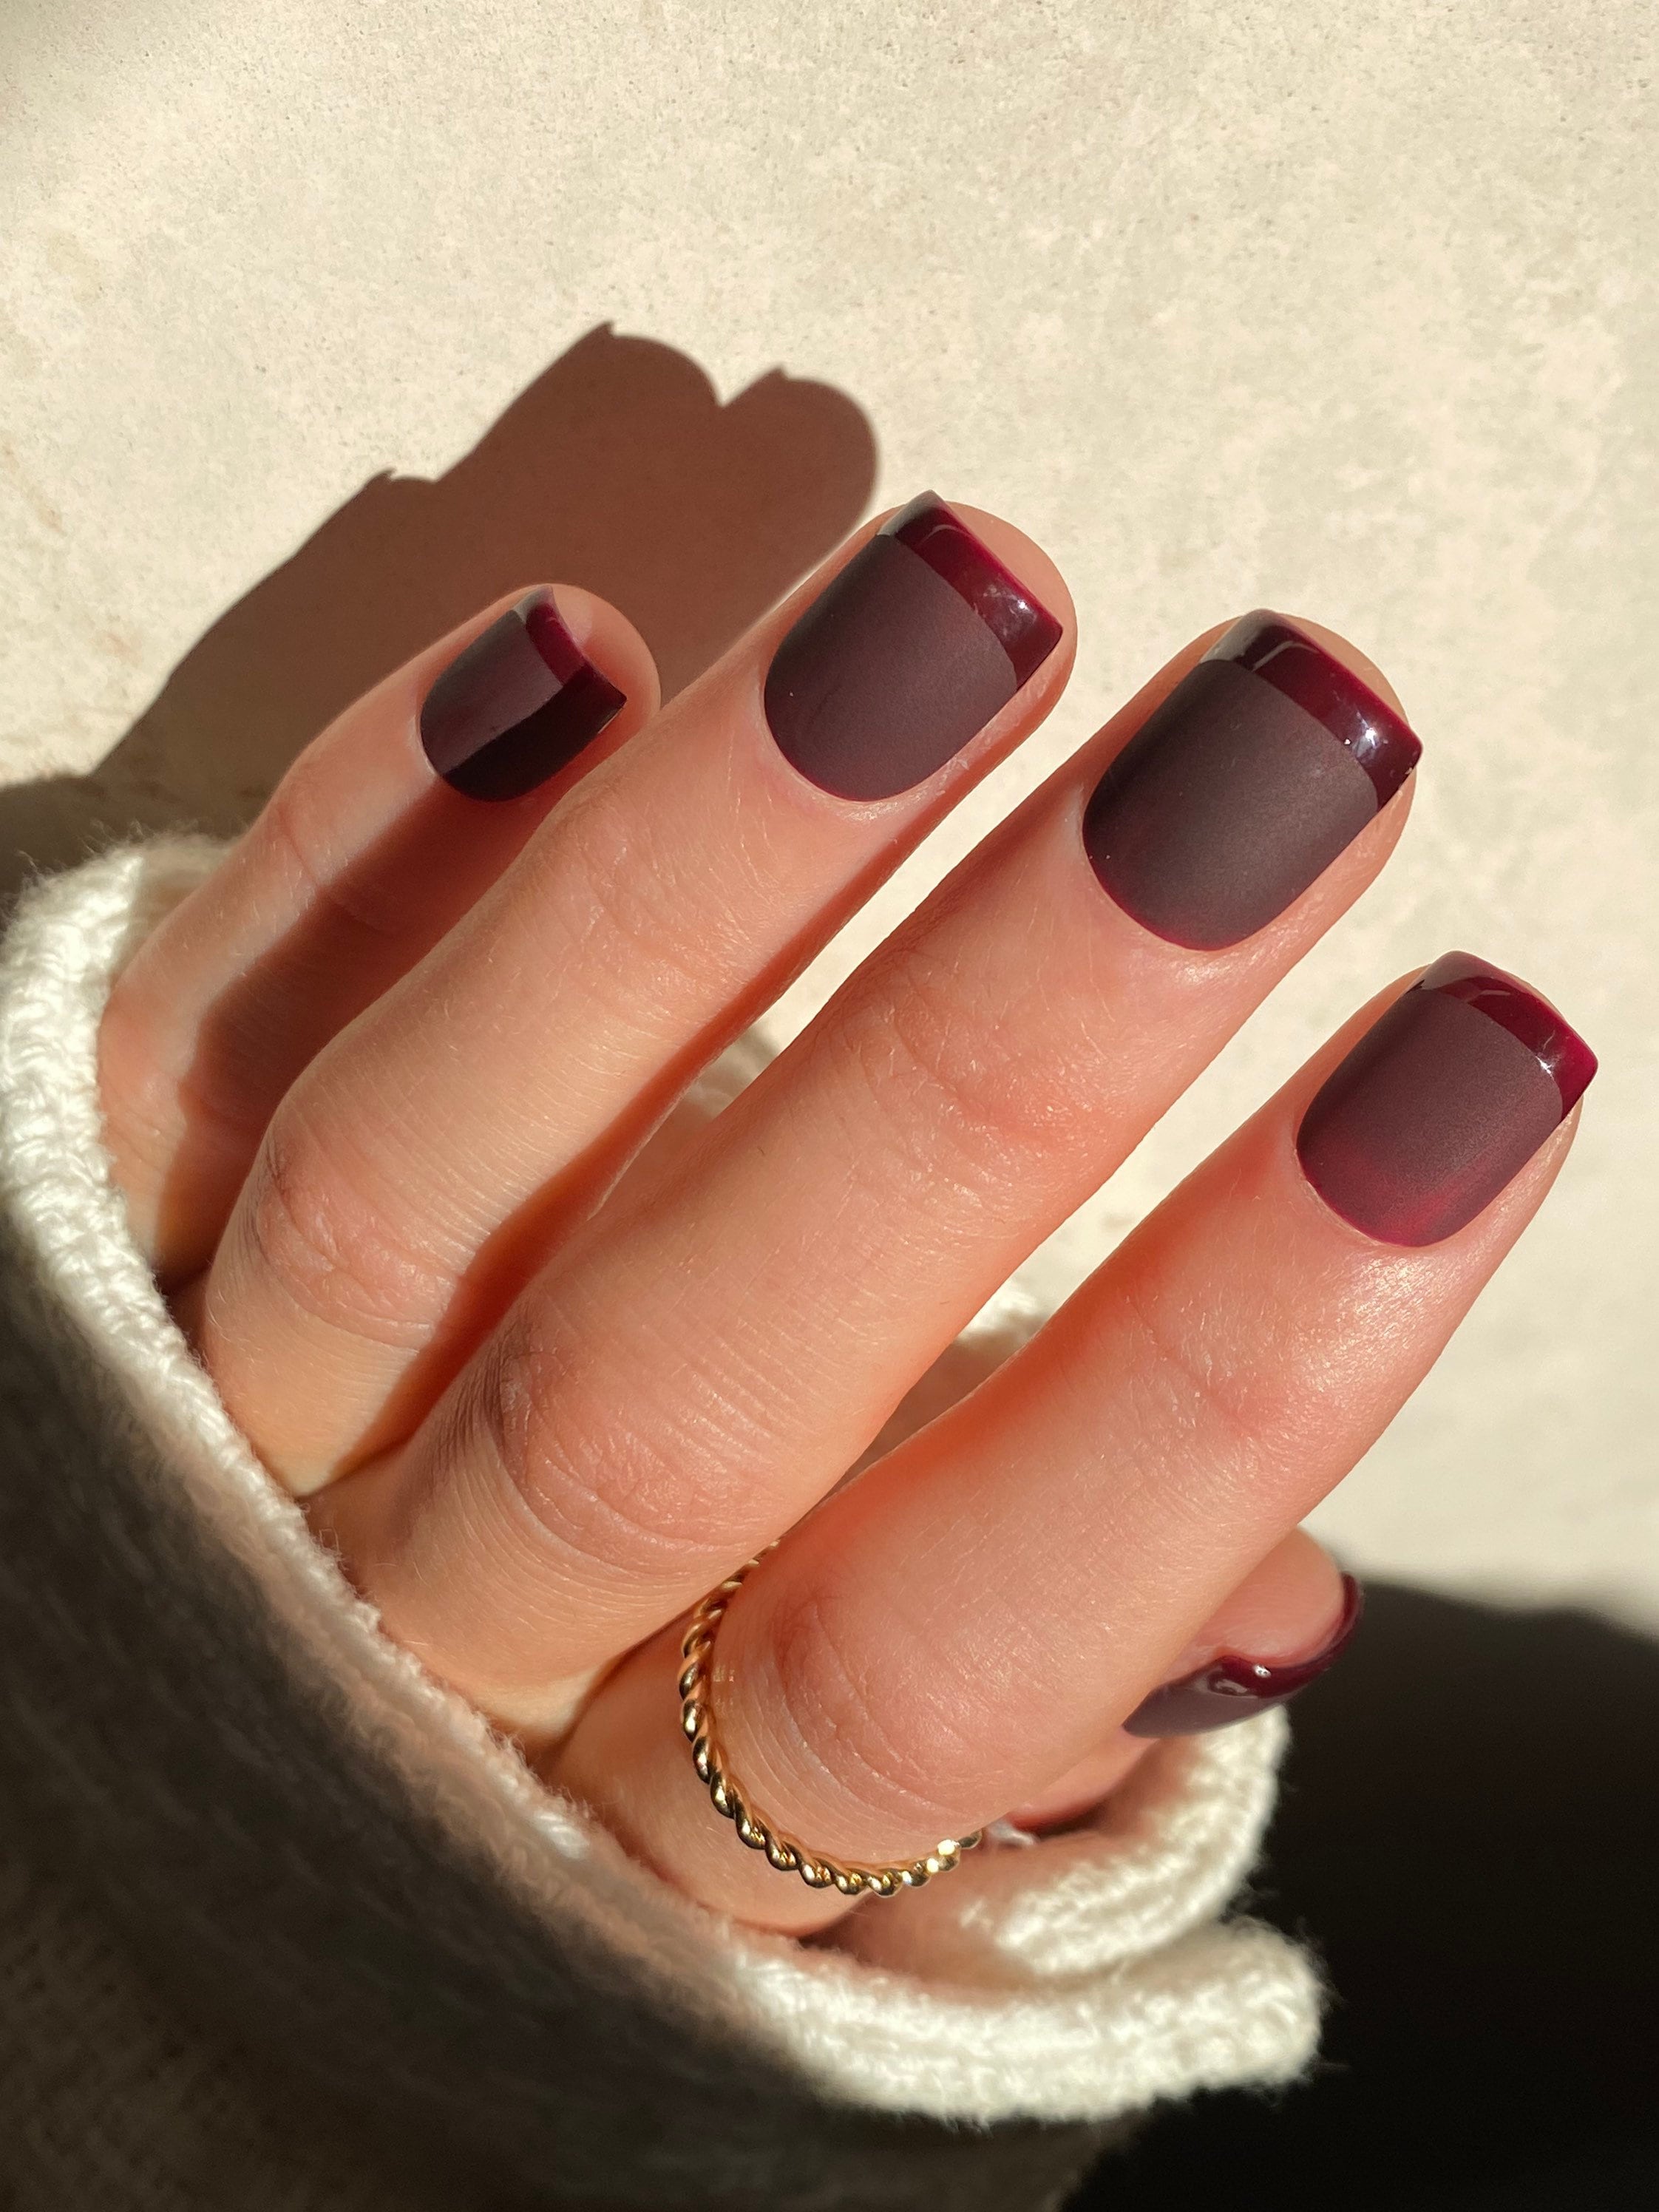 Burgundy Red Matte, Silver Metallic Line, Short Medium Squoval Fake Nails,  Women Girls Gift, Acrylic Full Cover Press On Nails, Adhesive Tabs, Daily  Date Party Festival Faux Ongles 24 pcs/kit : Amazon.ae: